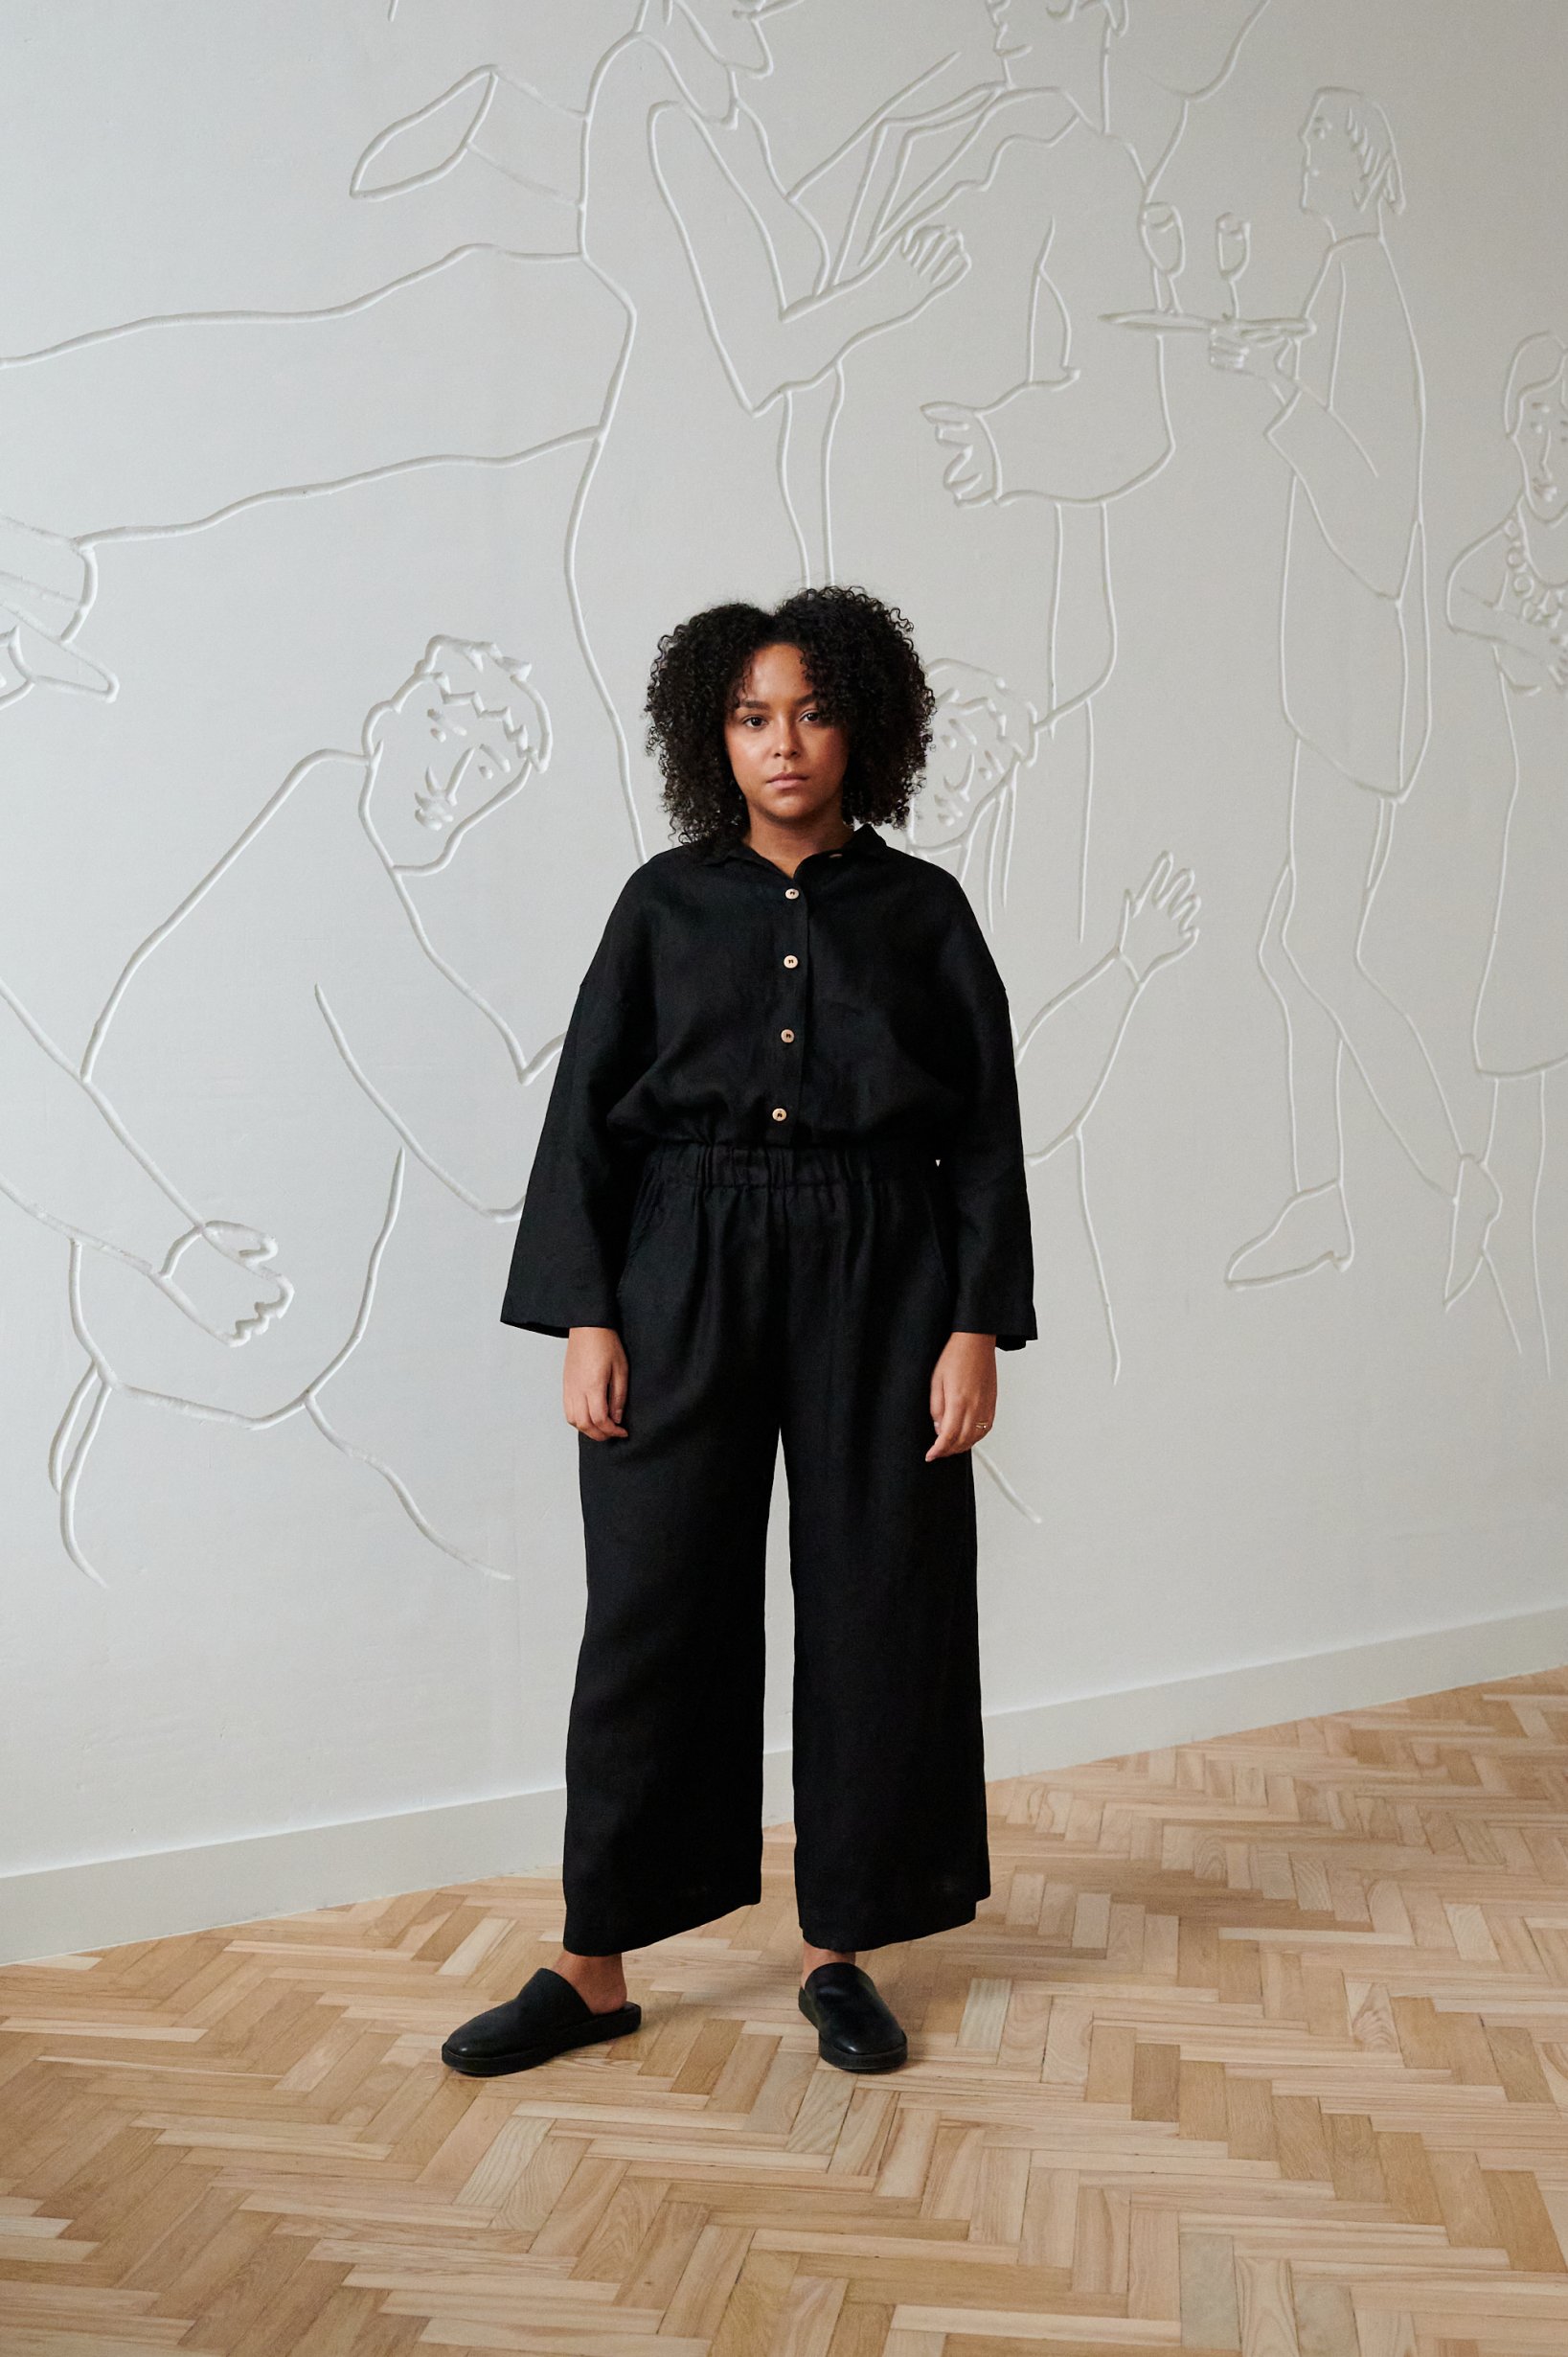 A woman in a room, wearing matching black linen shirt and pants